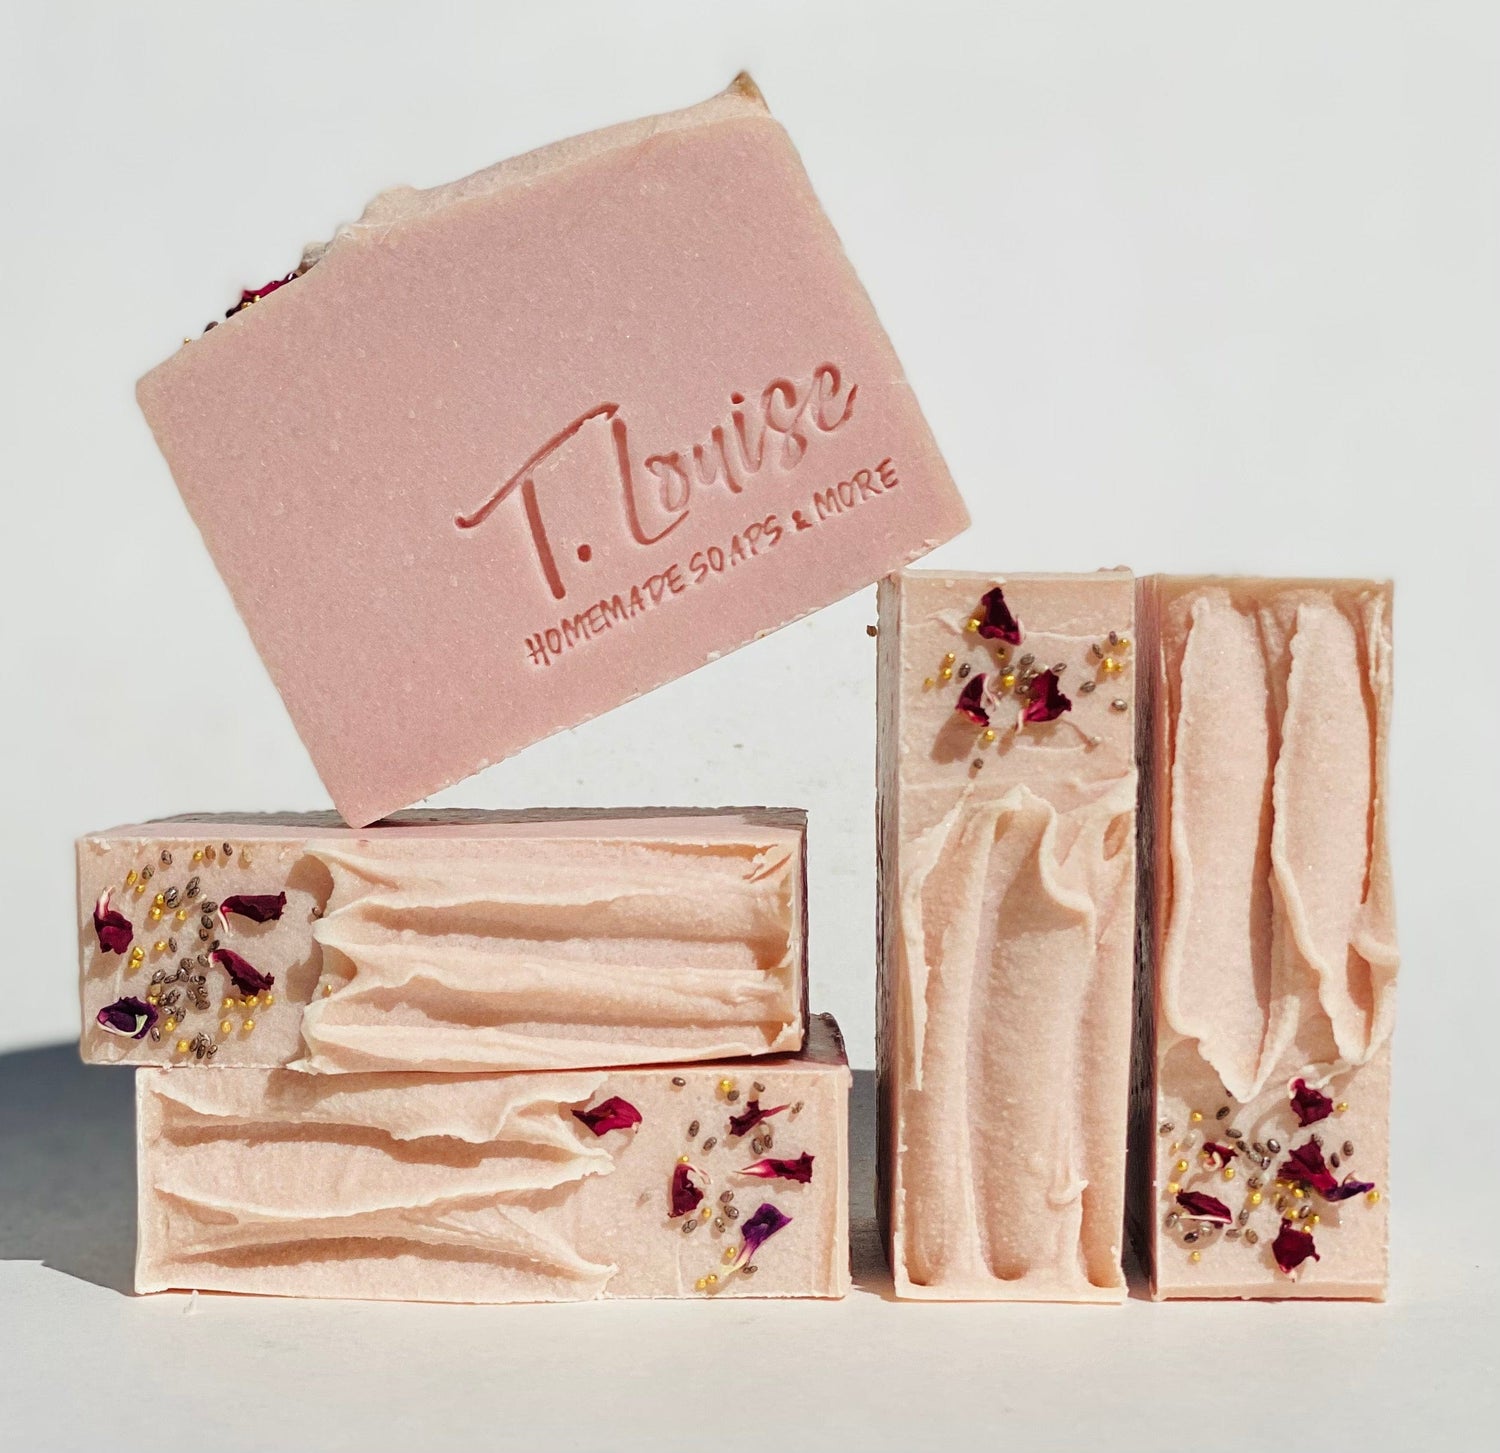 Mulberry and Thyme handmade soap T Louise handmade soaps